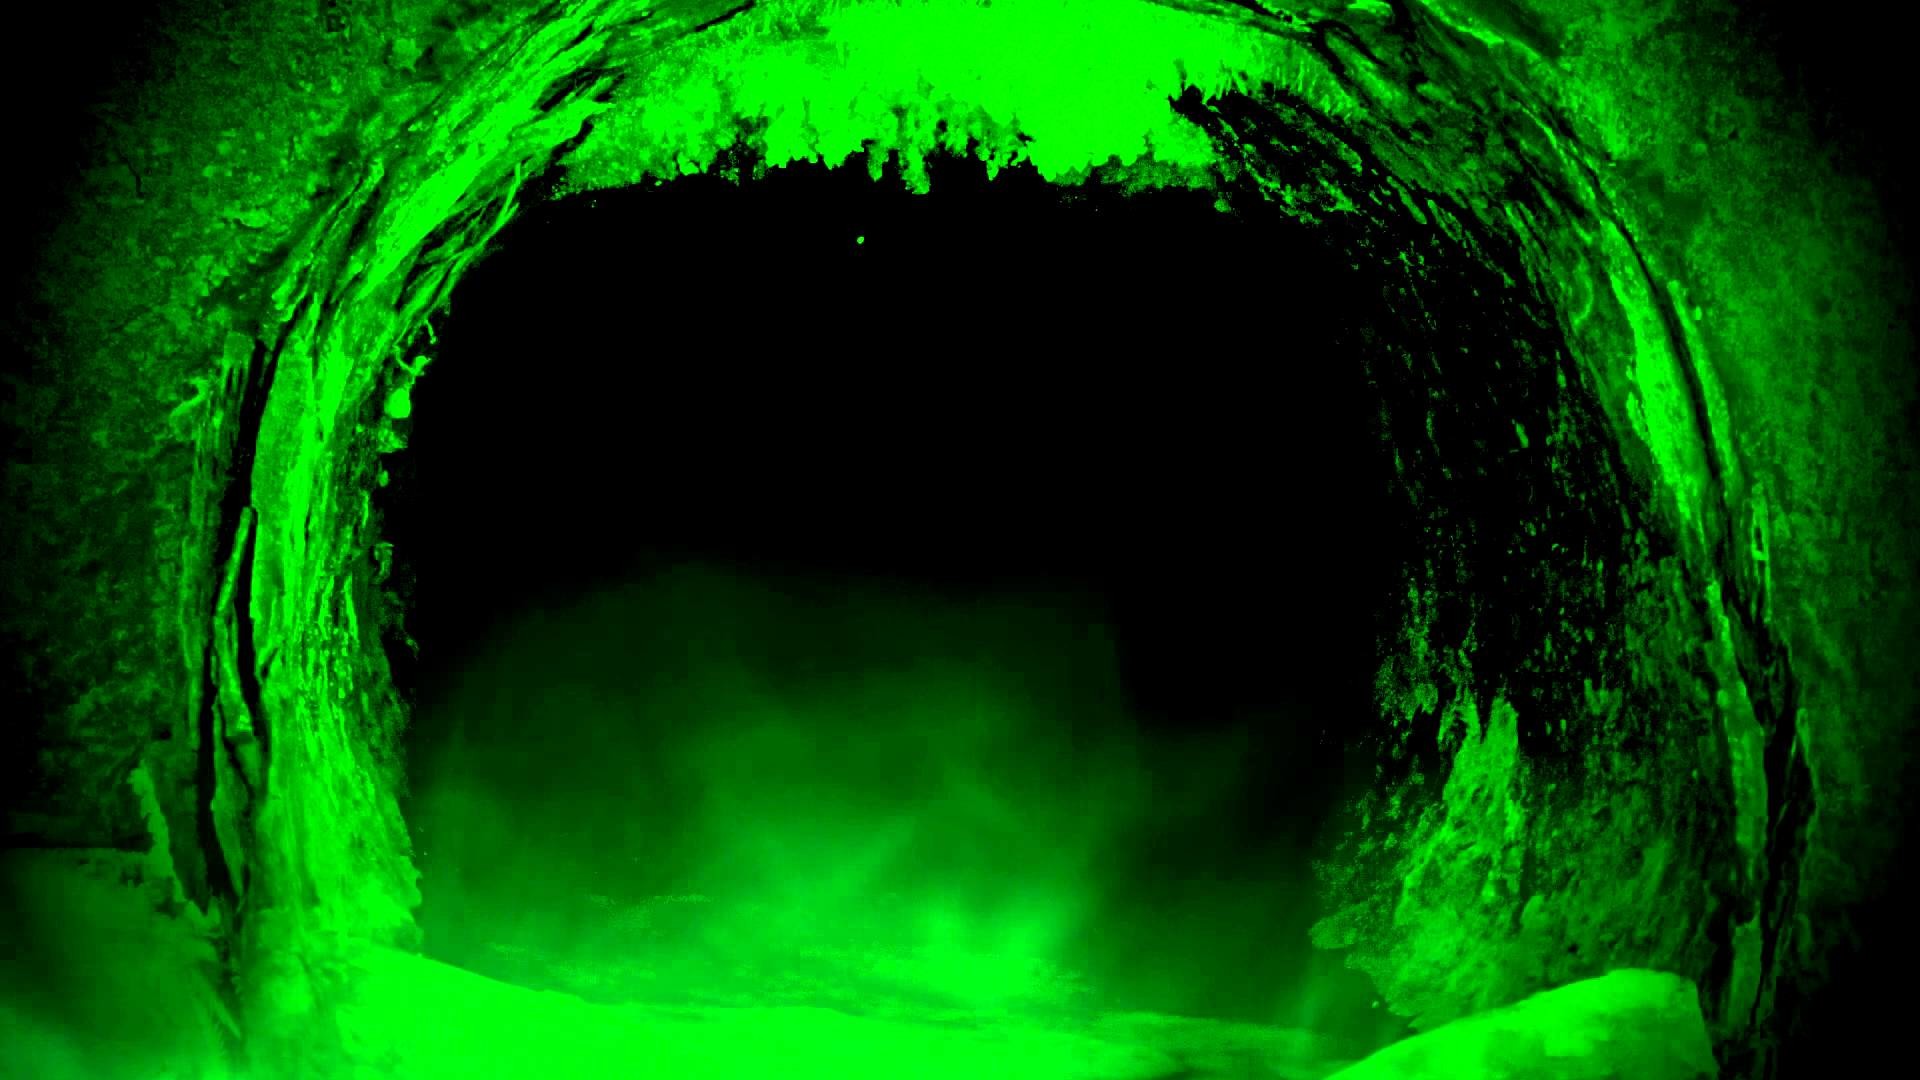 1920x1080 'Toxic-Waste/Sewer' Royalty free Stock Footage HD Video clip - YouTube